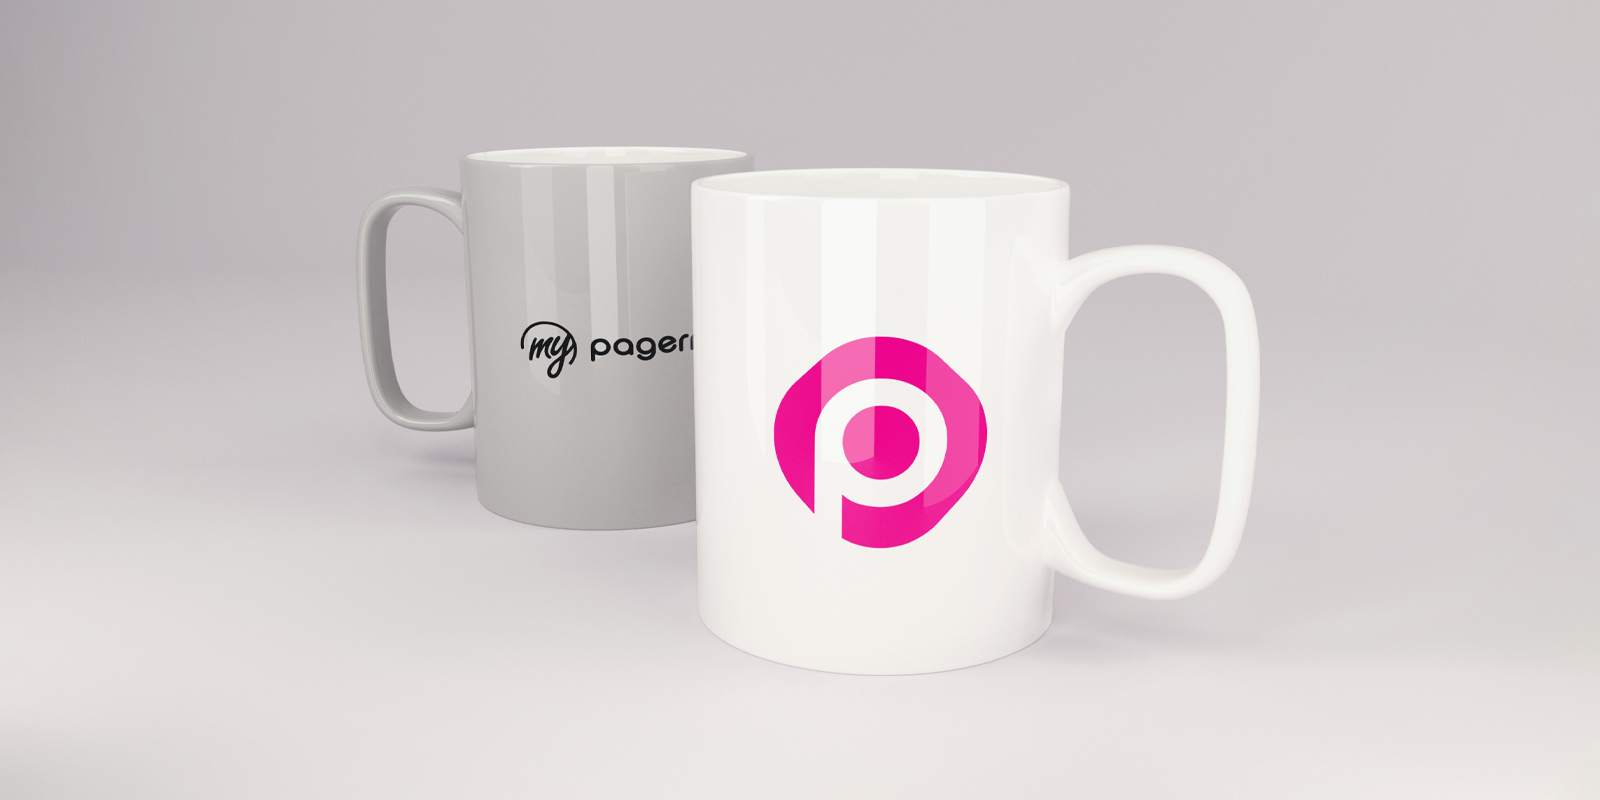 Mugs in Paris - Print with Pagerr